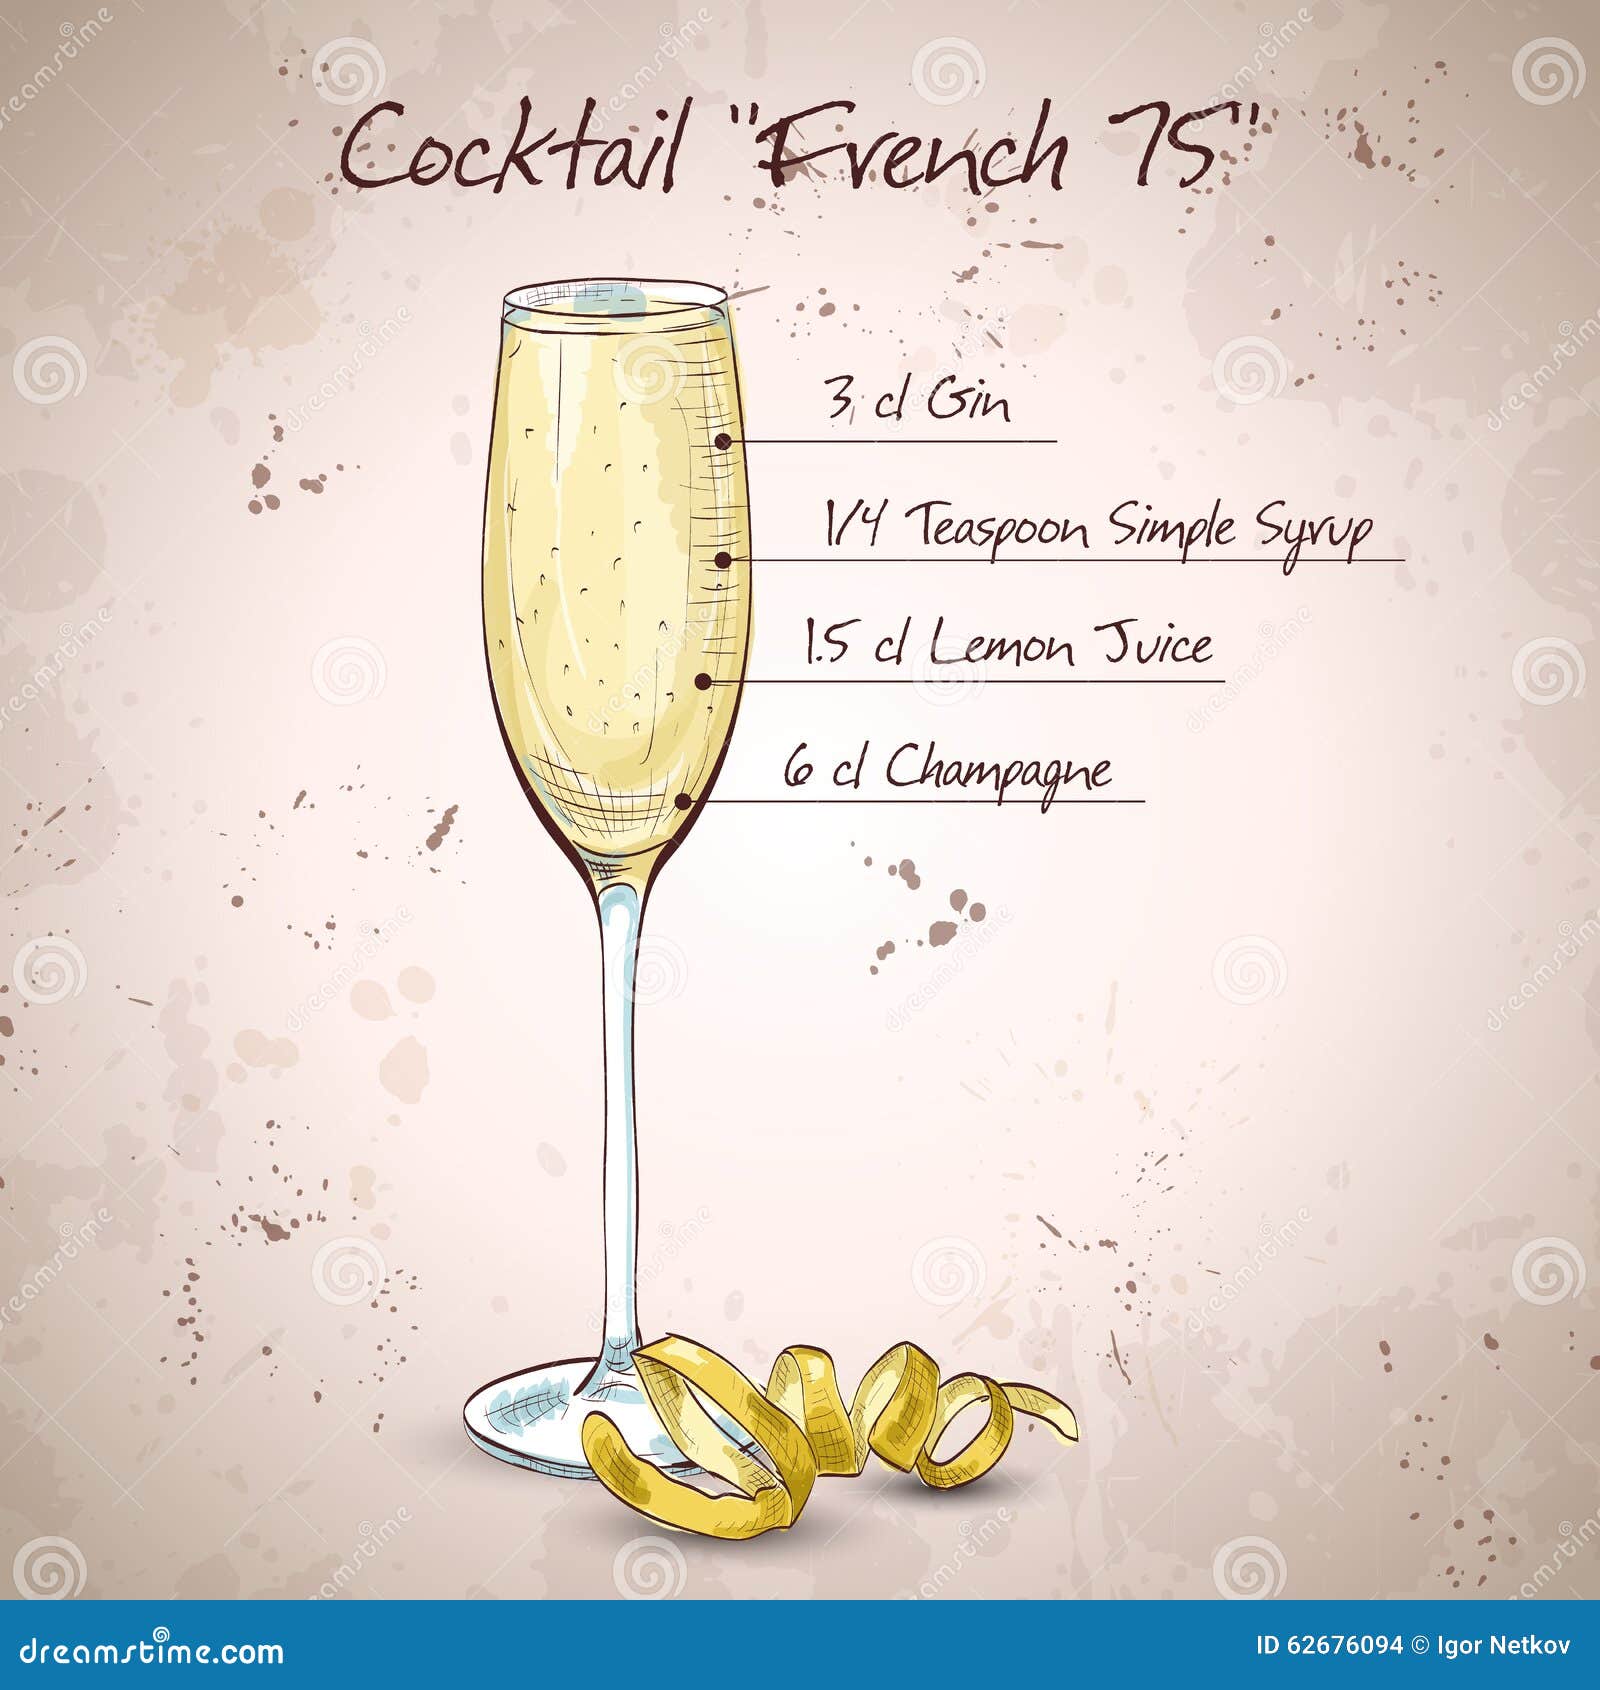 Cocktail French 75 stock vector. Illustration of cold - 62676094